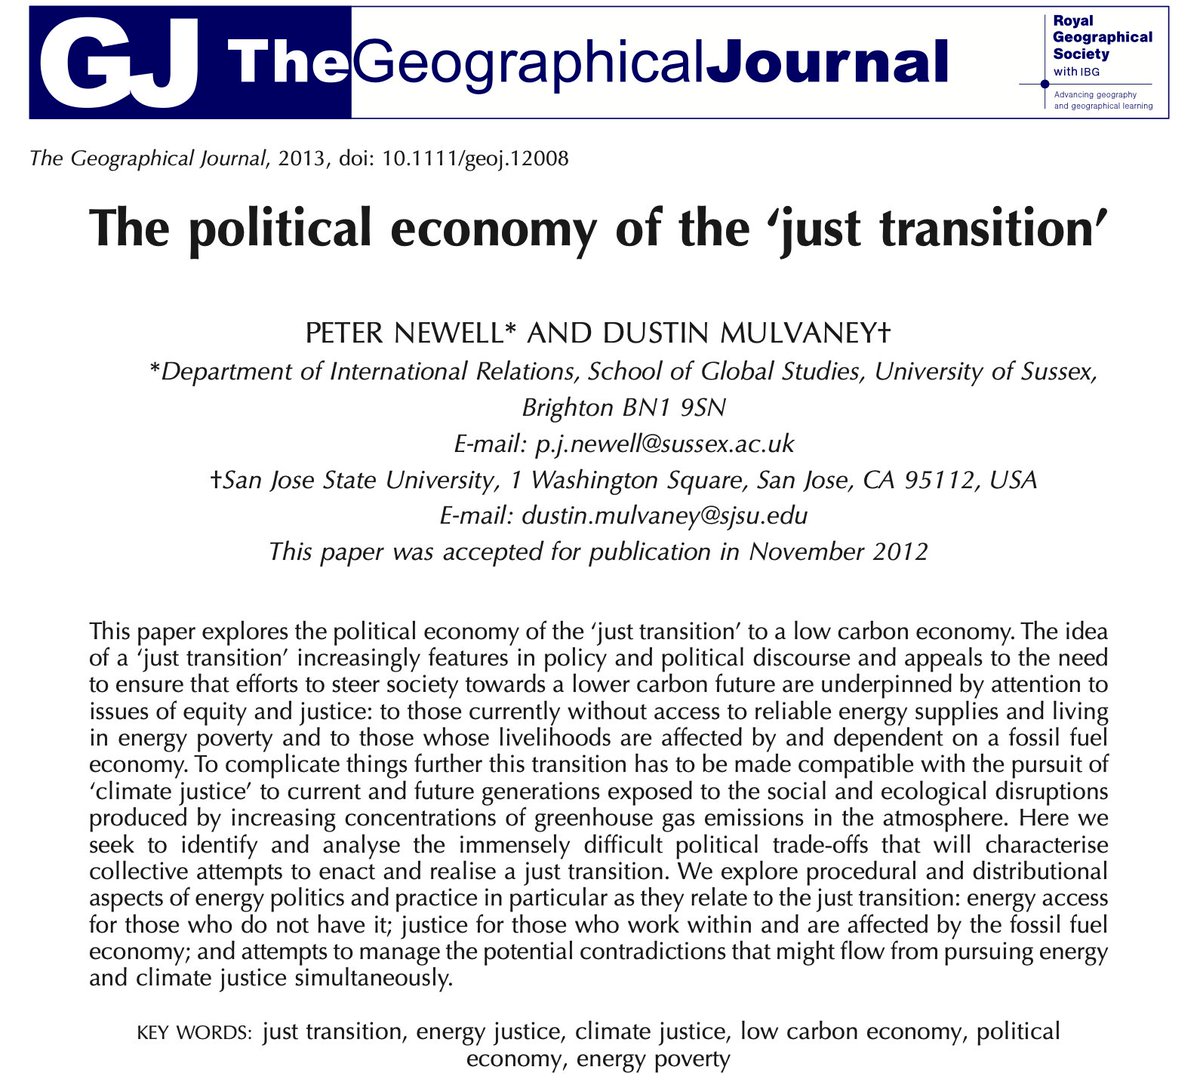 The political economy of the just transition has over 1,000 citations! 🎉 Epic reading list of 1,006 papers on #JustTransition #EnergyTransition #EnergyJustice #ClimateJustice #EnergyPoverty. scholar.google.com/scholar?oi=bib…